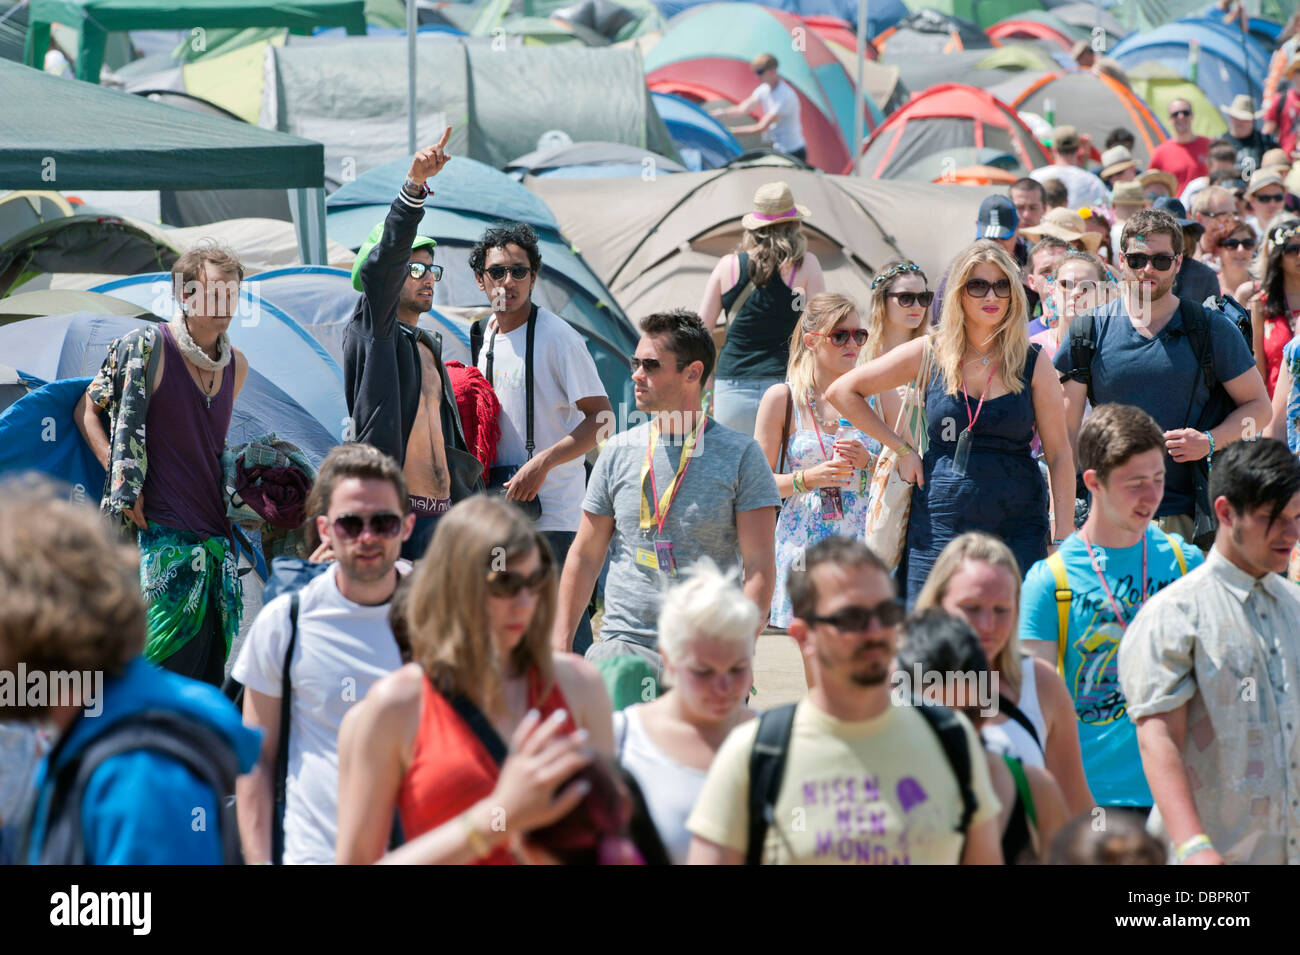 Glastonbury Festival 2013 UK - Campers walk to the main arenas surrounded by tents in the Pennard Hill Ground campsite Stock Photo